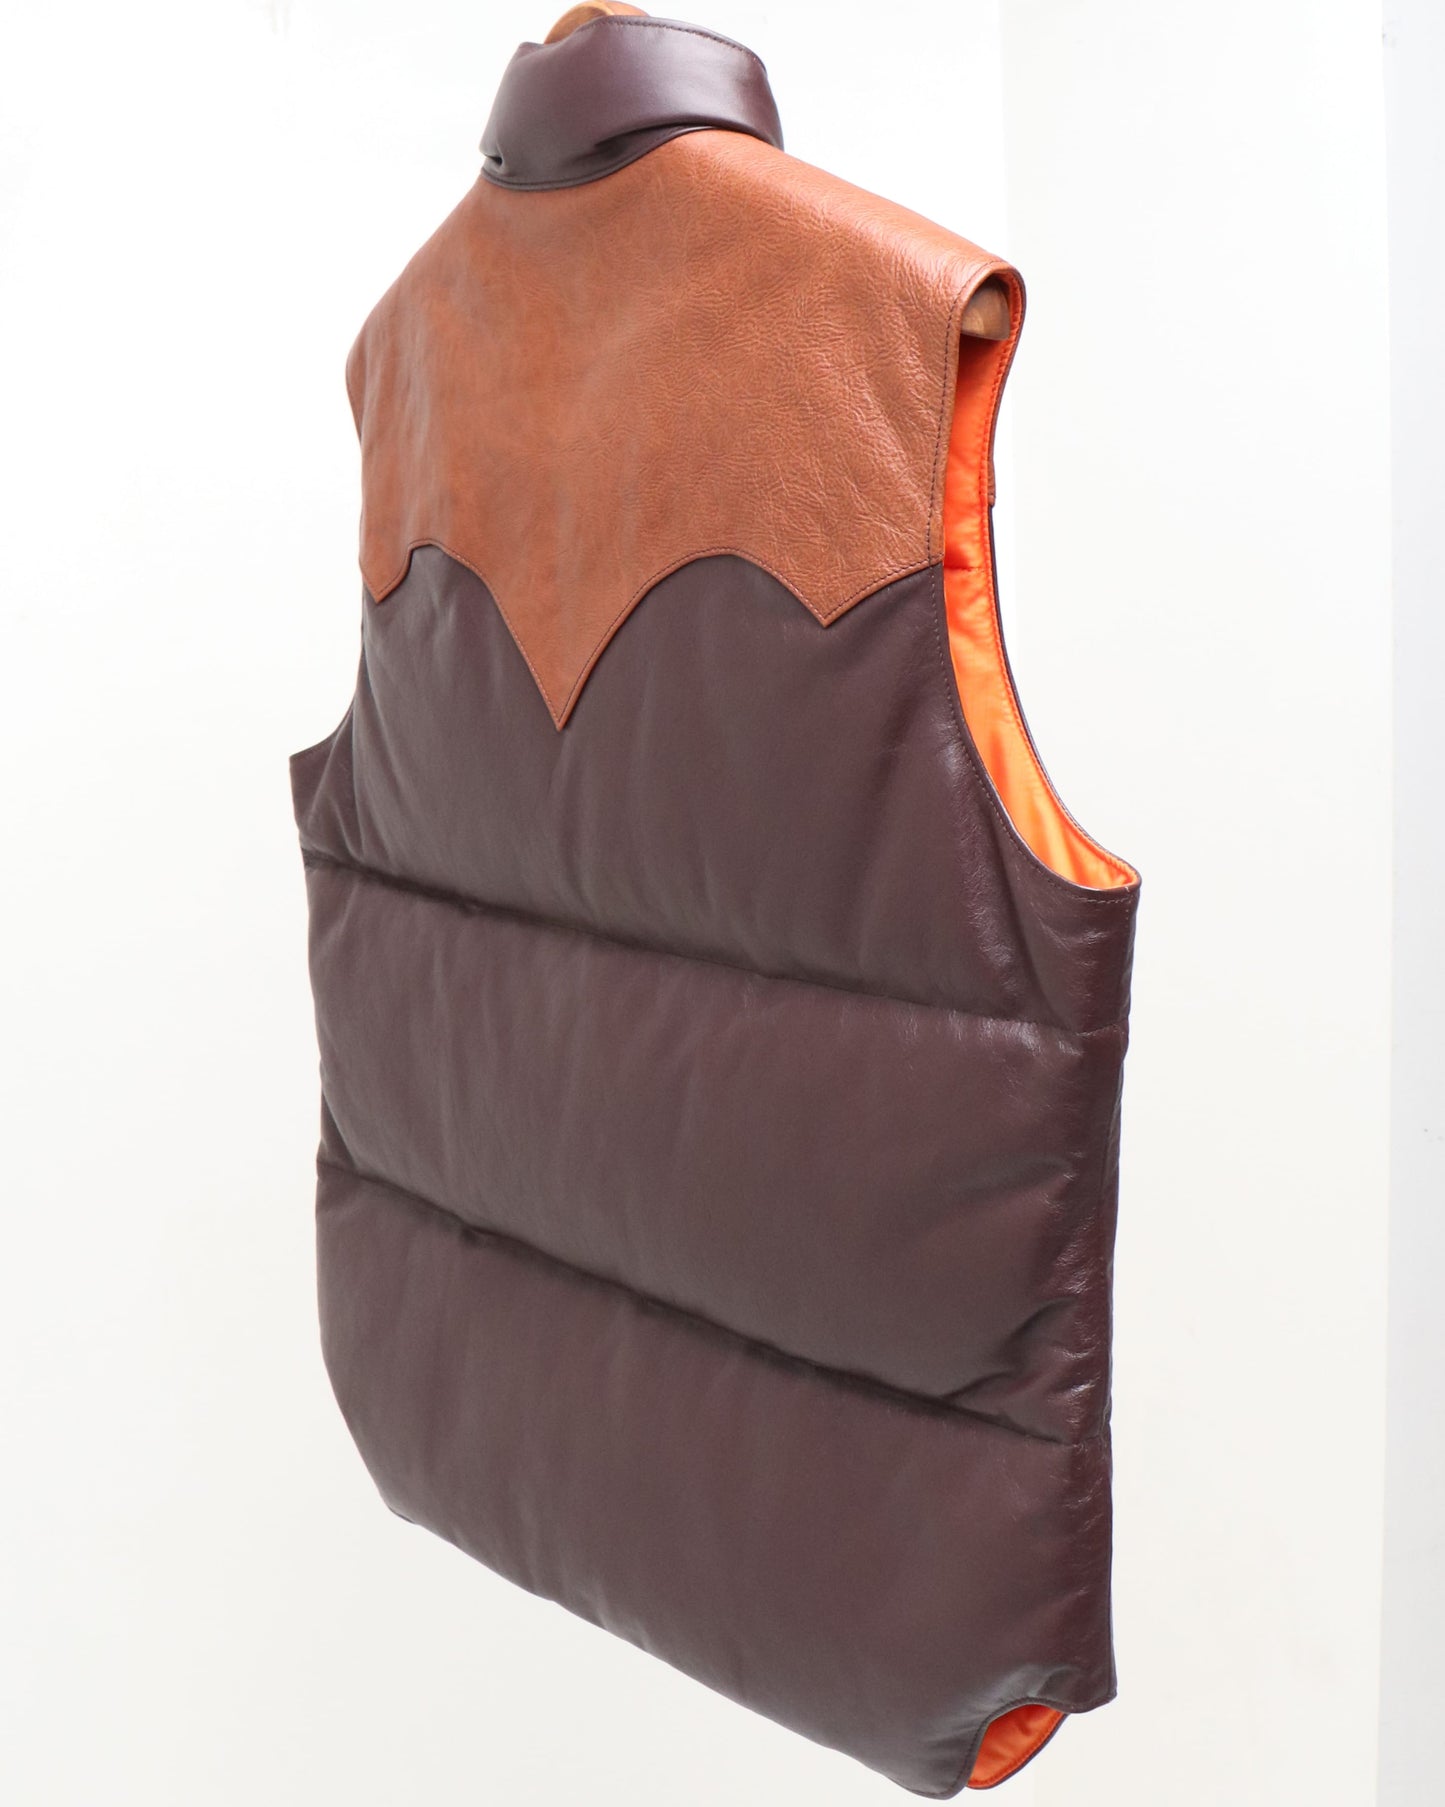 ALL LEATHER DOWN VEST